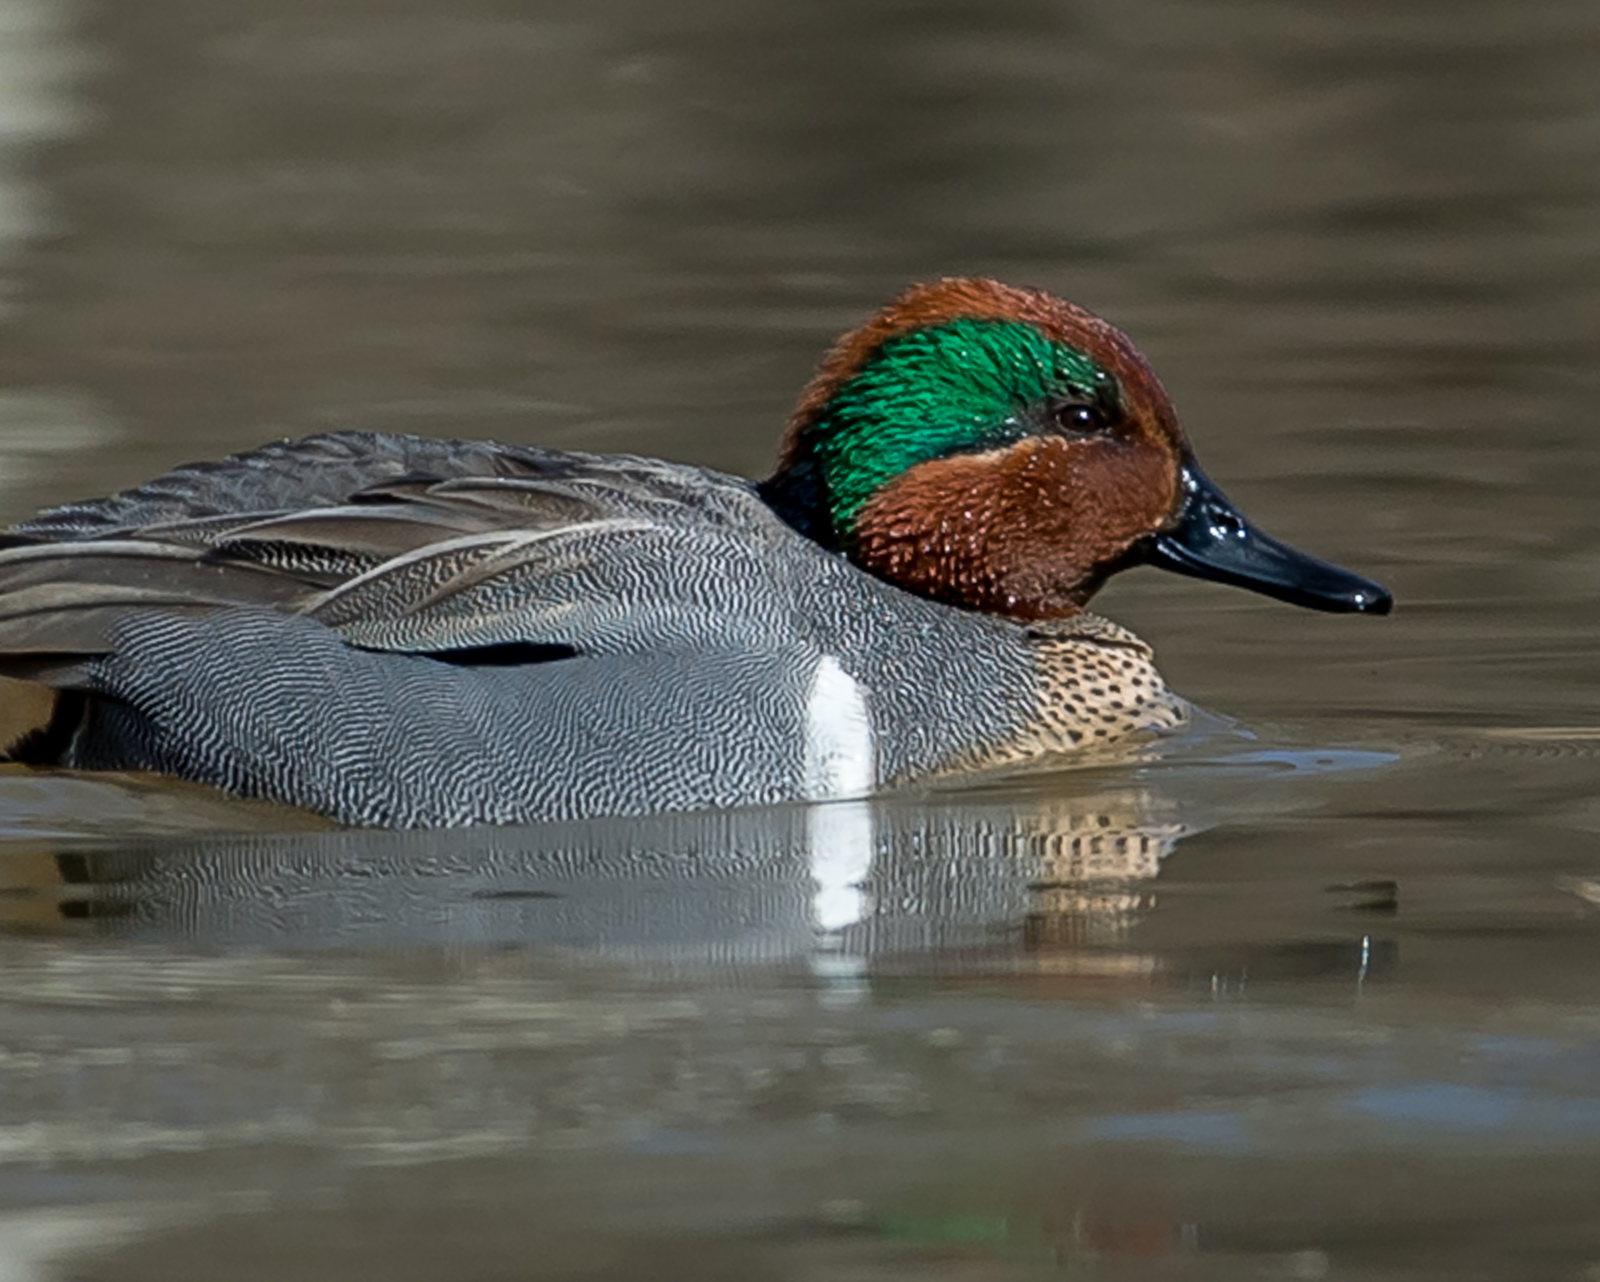 The vibrant blue-green feathers around the eye of the teak duck are the origin of the teal color.